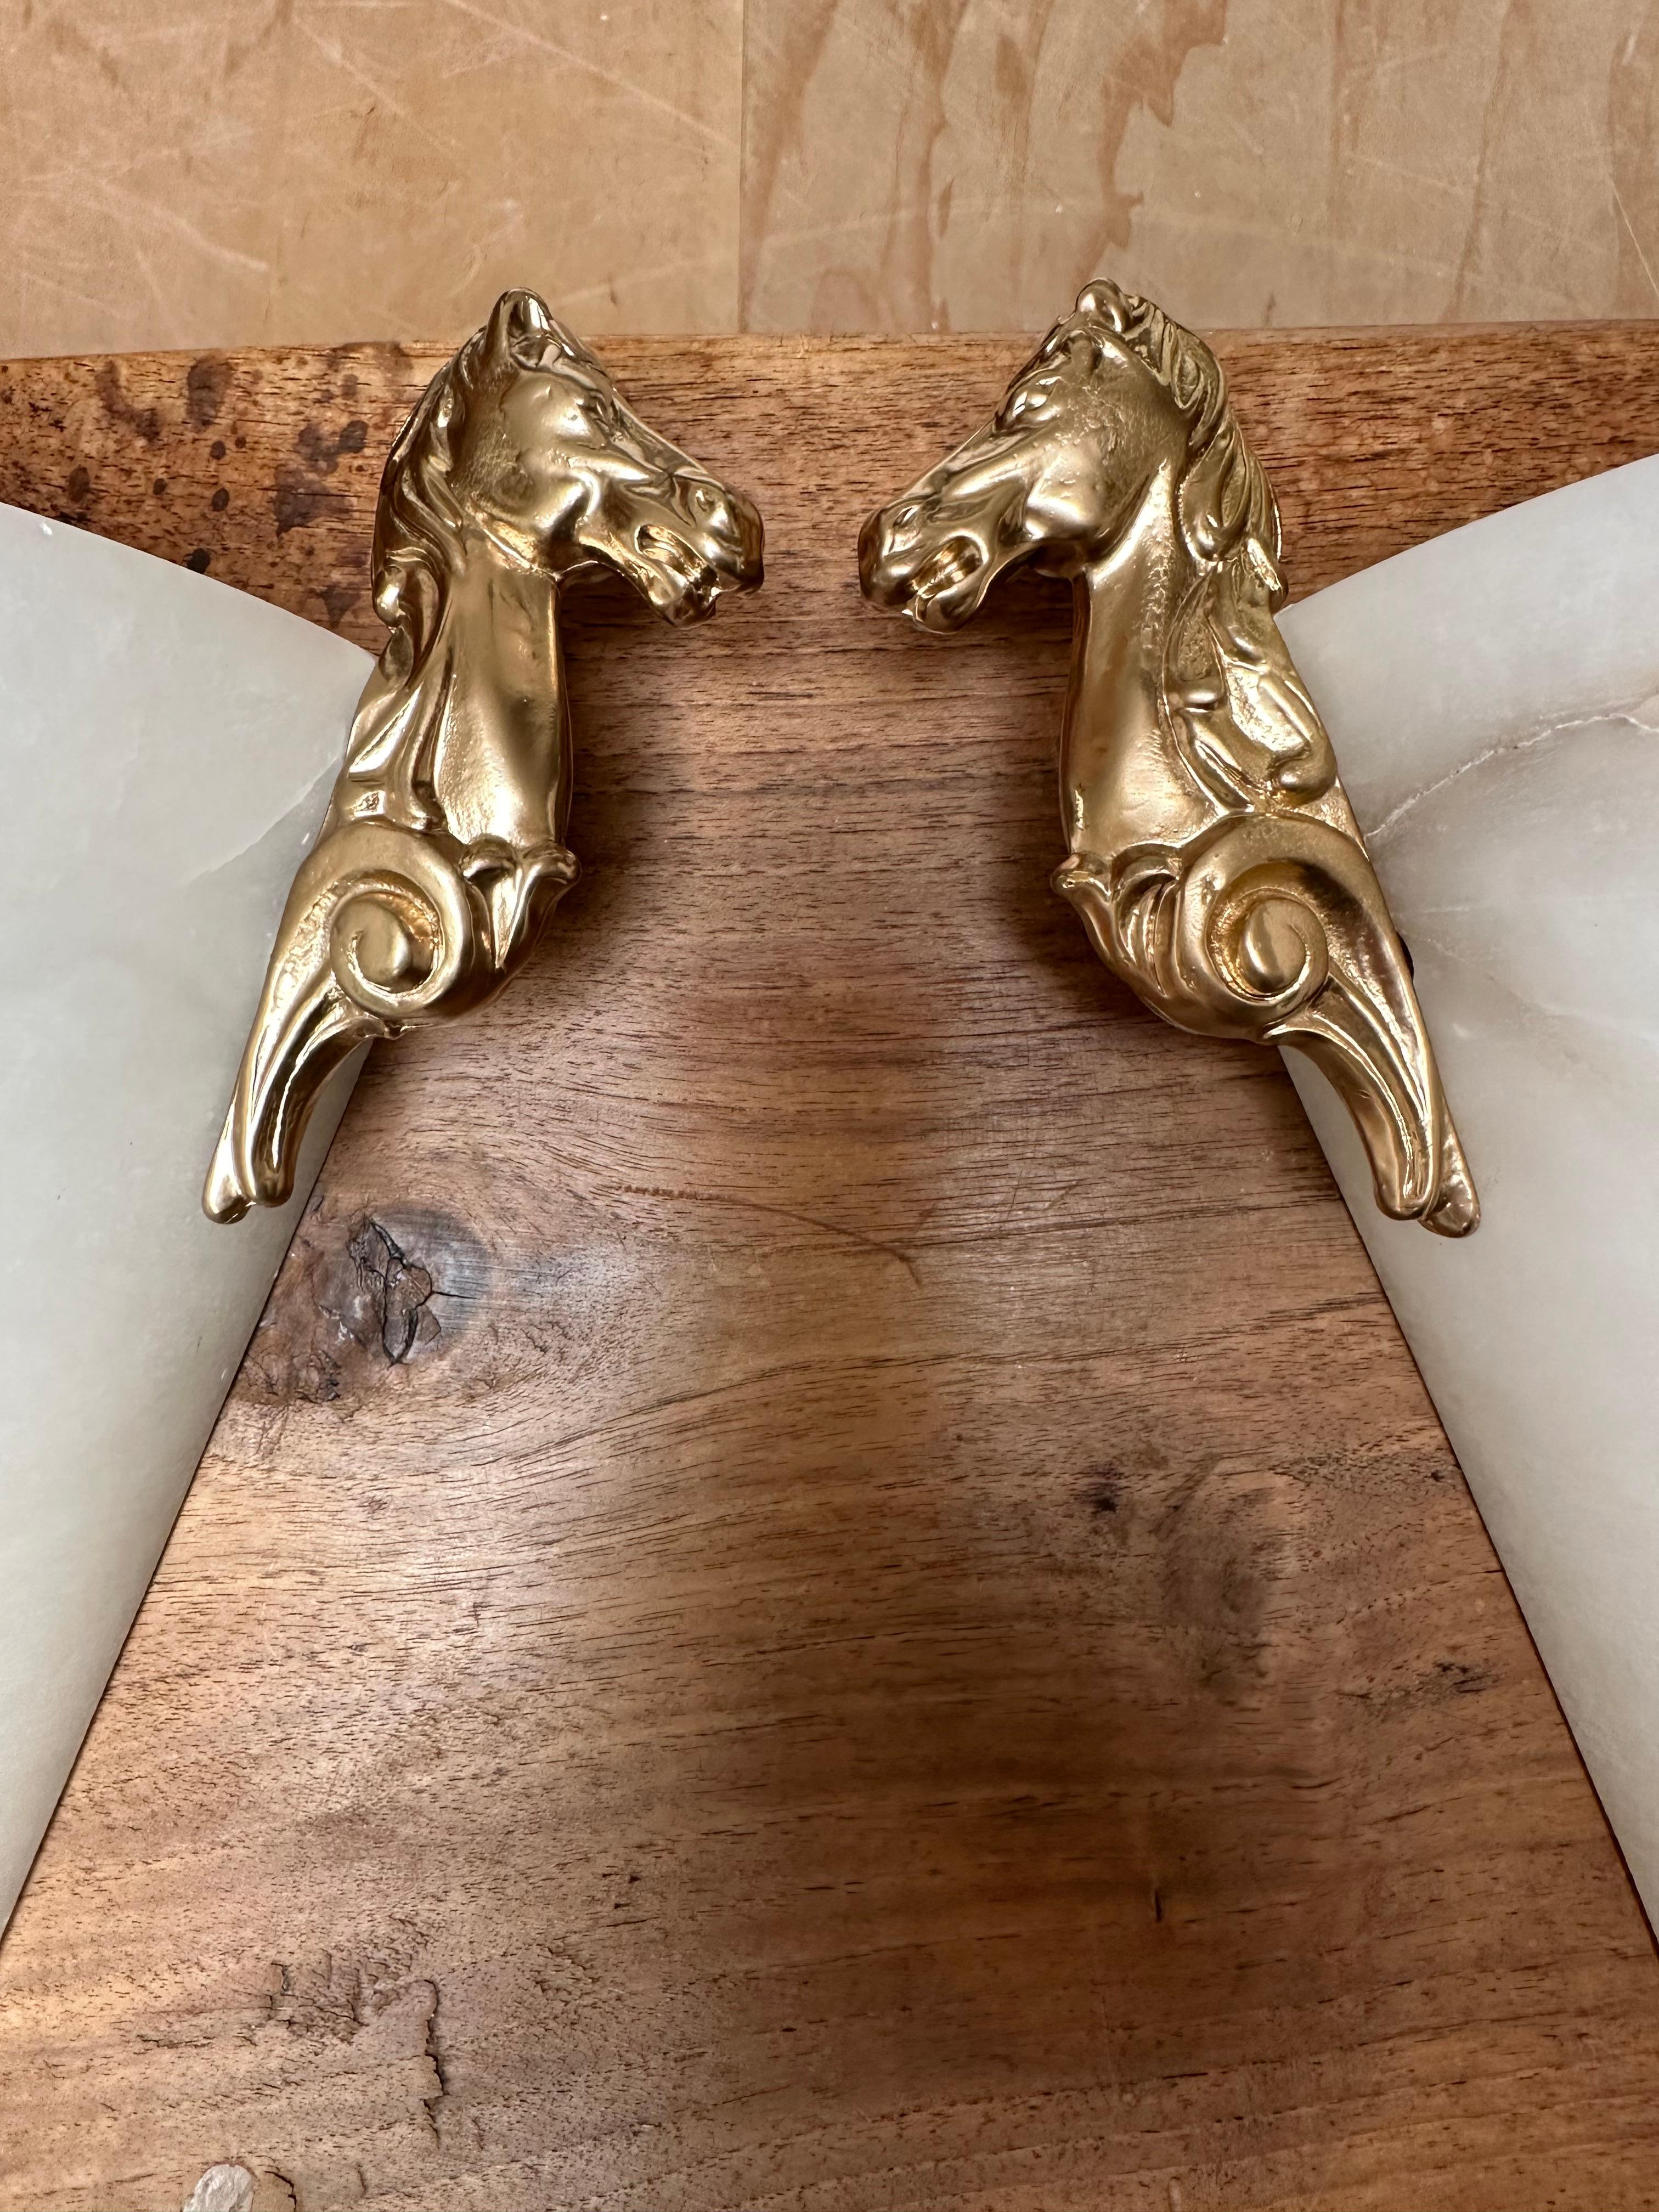 Midcentury Modern Italy Pair Art Deco Style Alabaster Sconces w Horse Sculptures For Sale 2